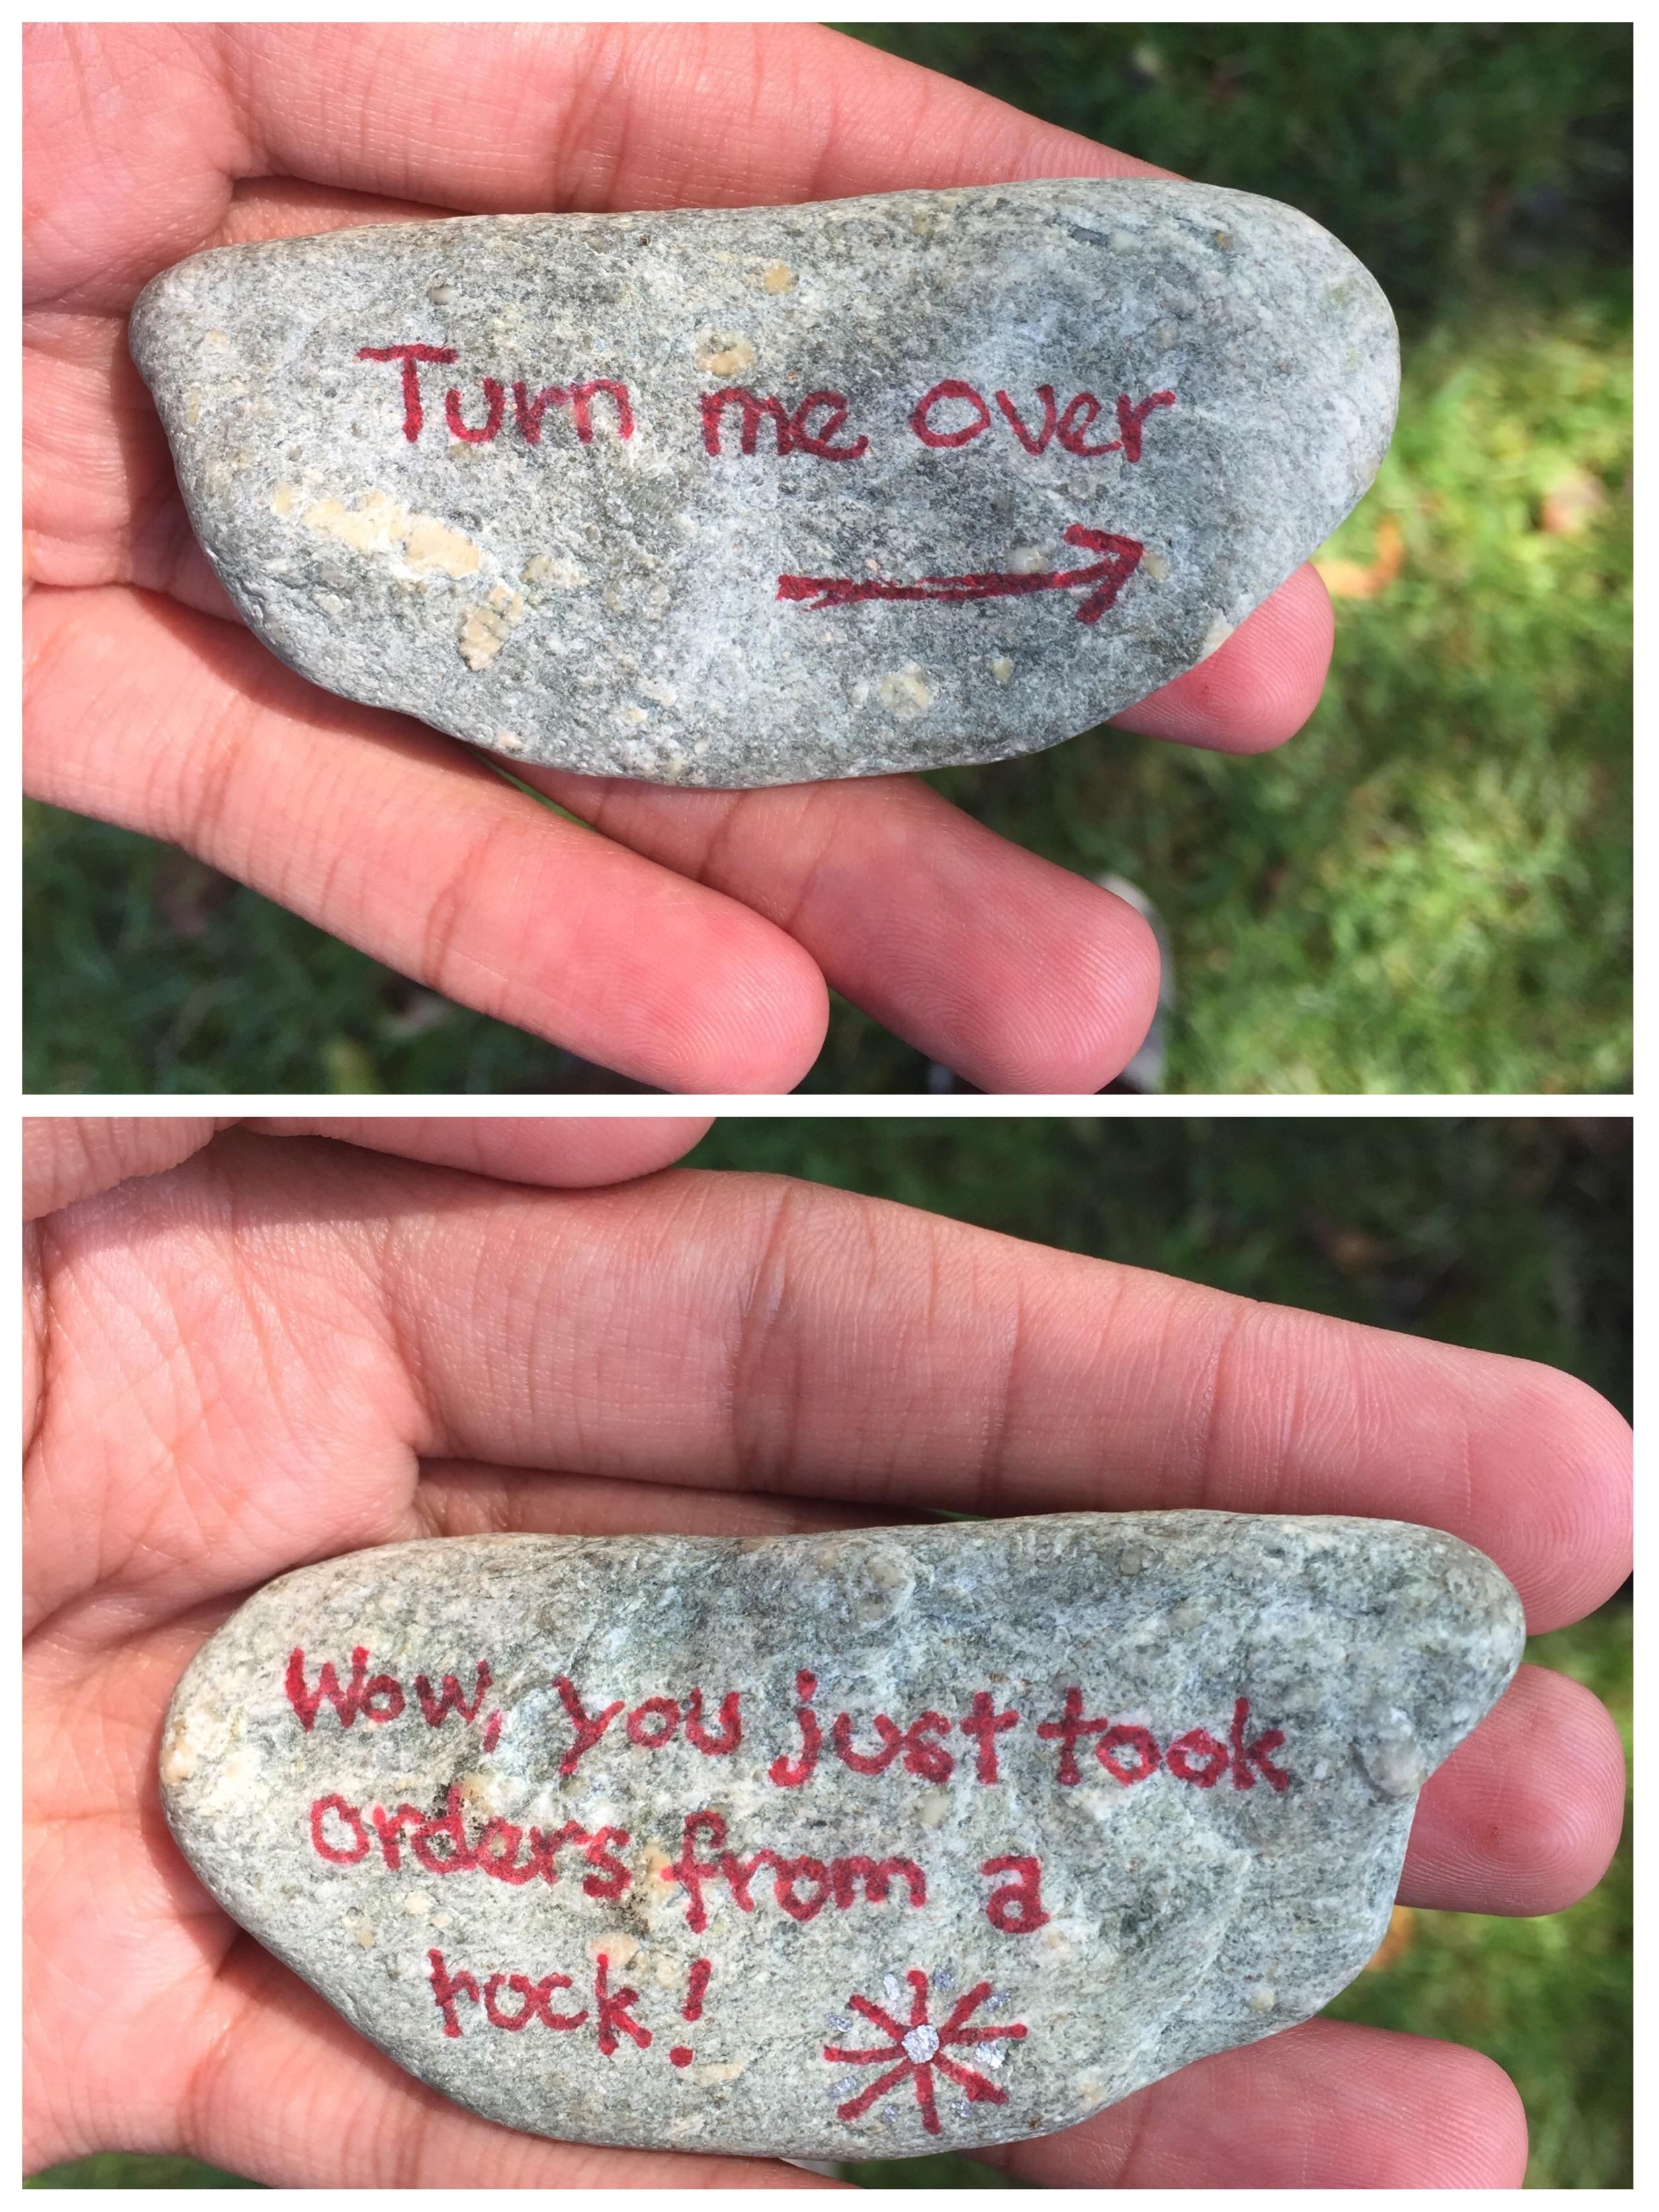 Found this unusual rock on vacation